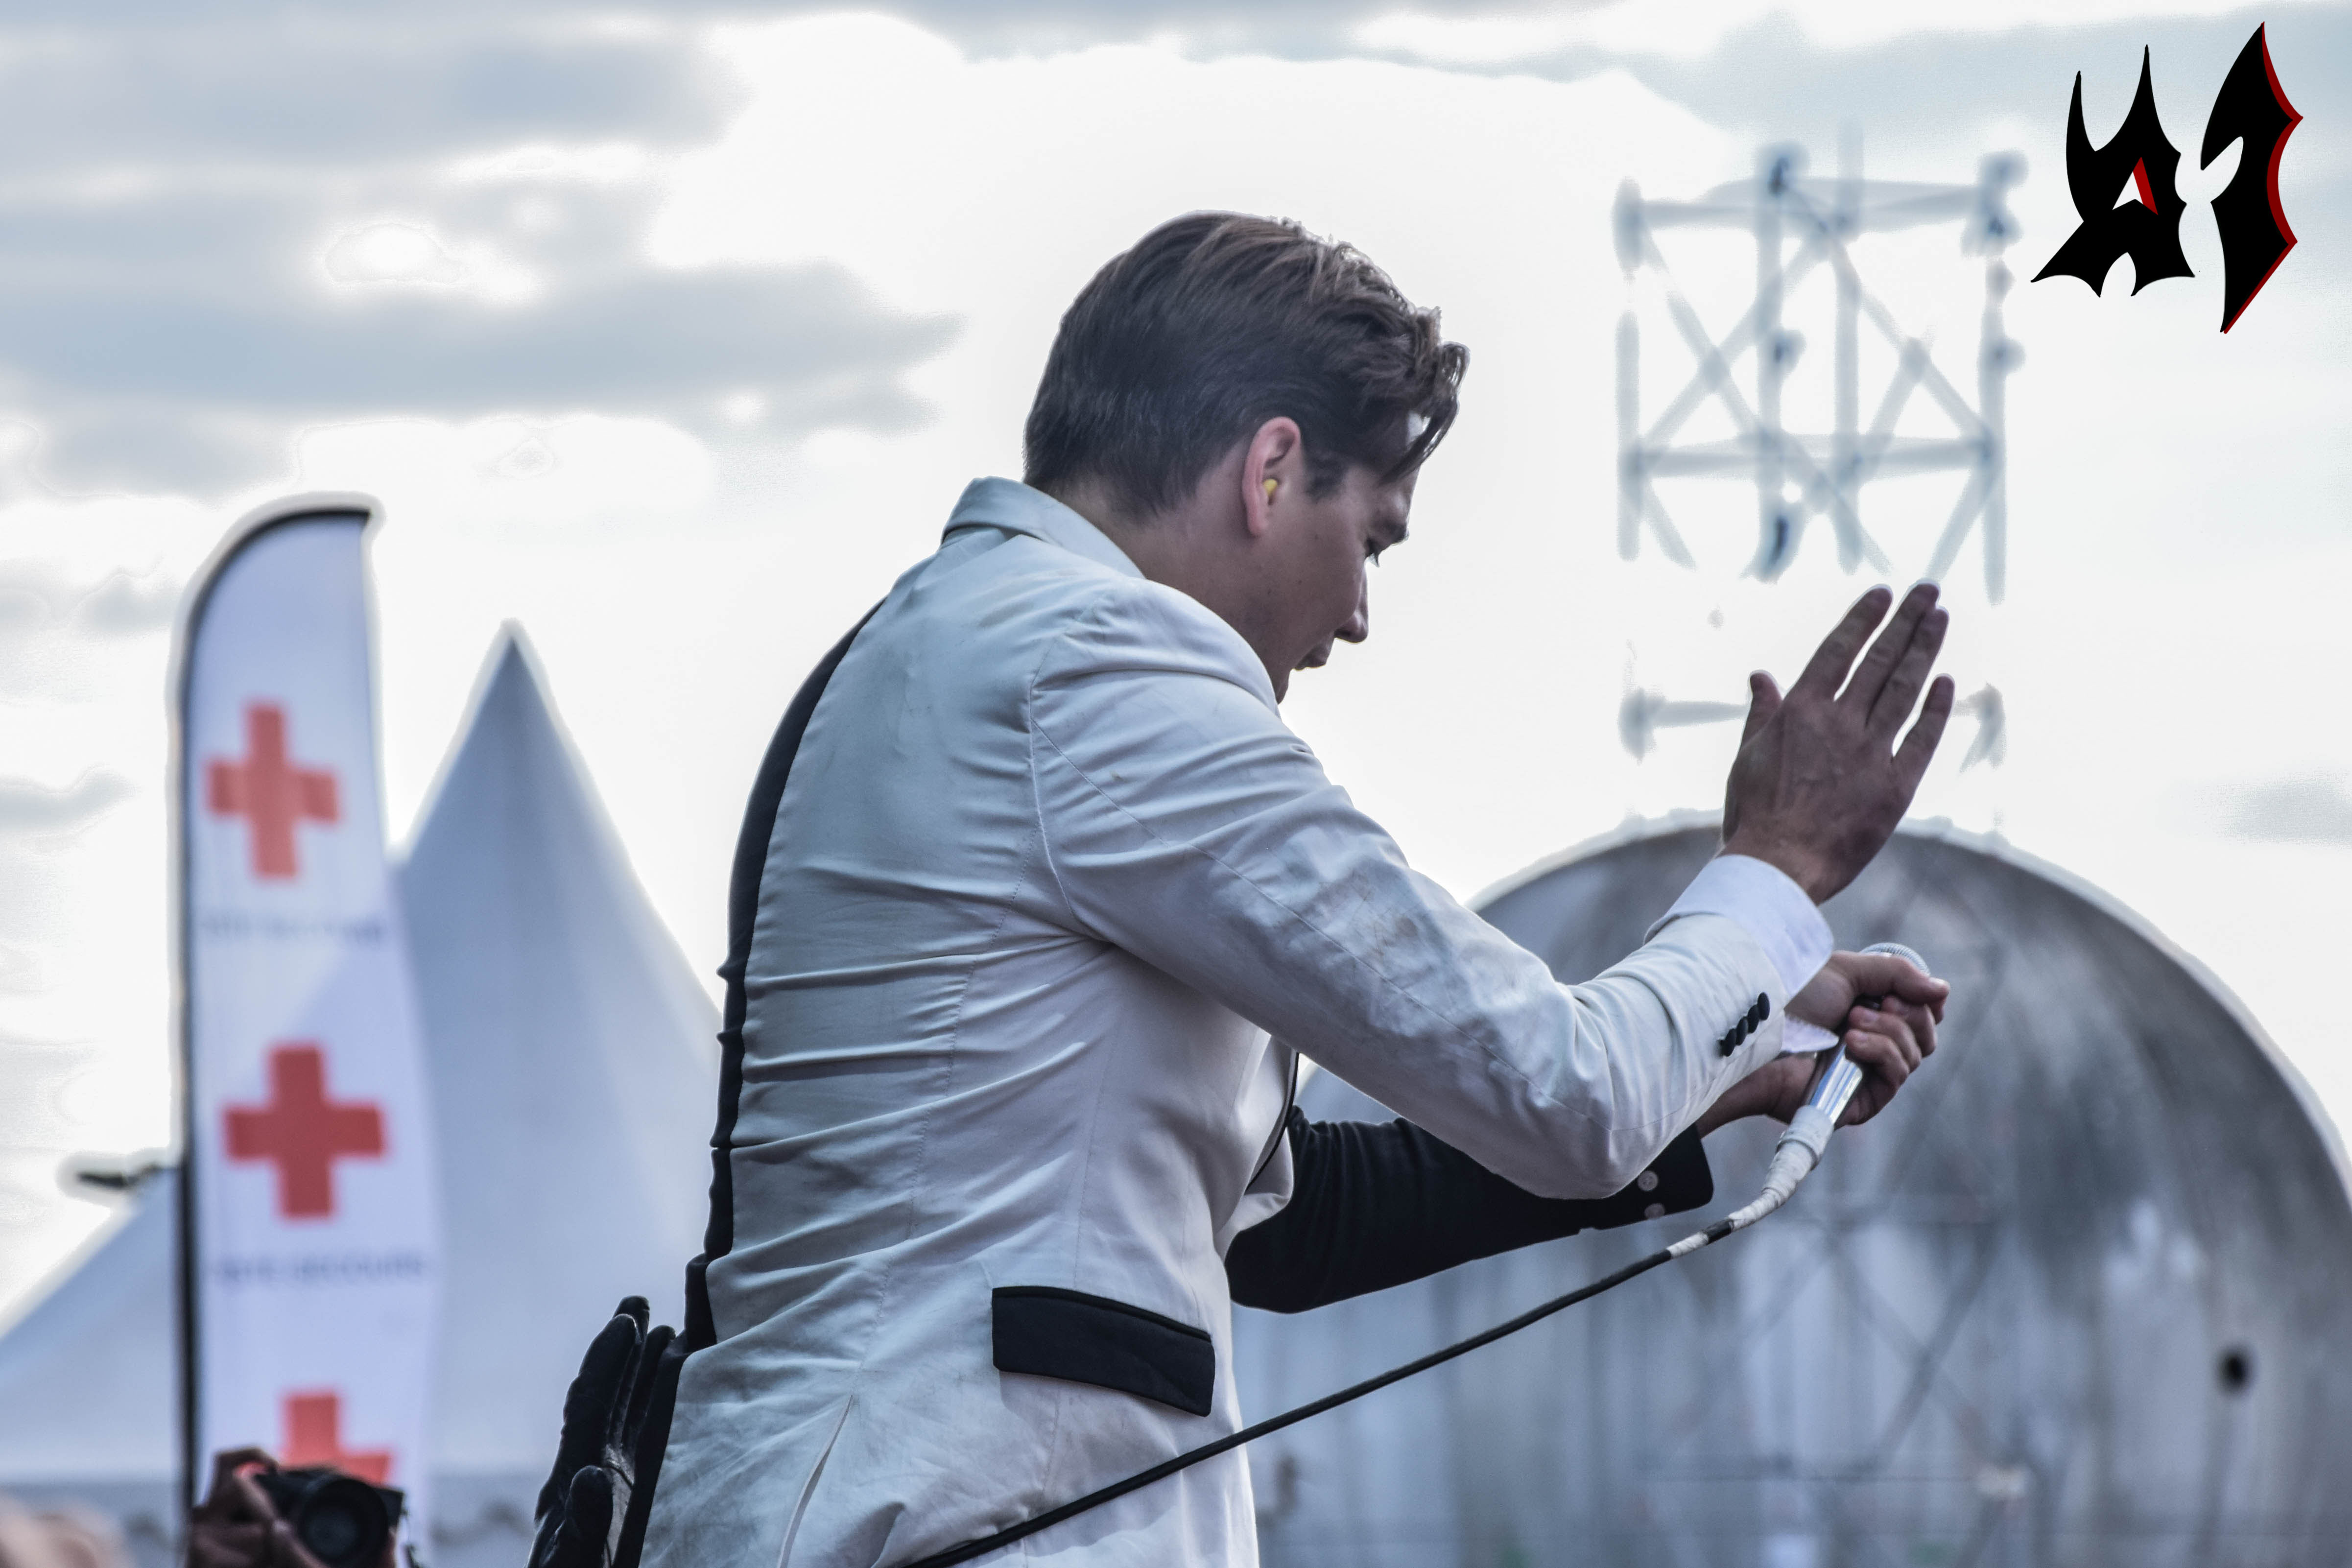 Donwload 2018 – Day 3 - The Hives 11